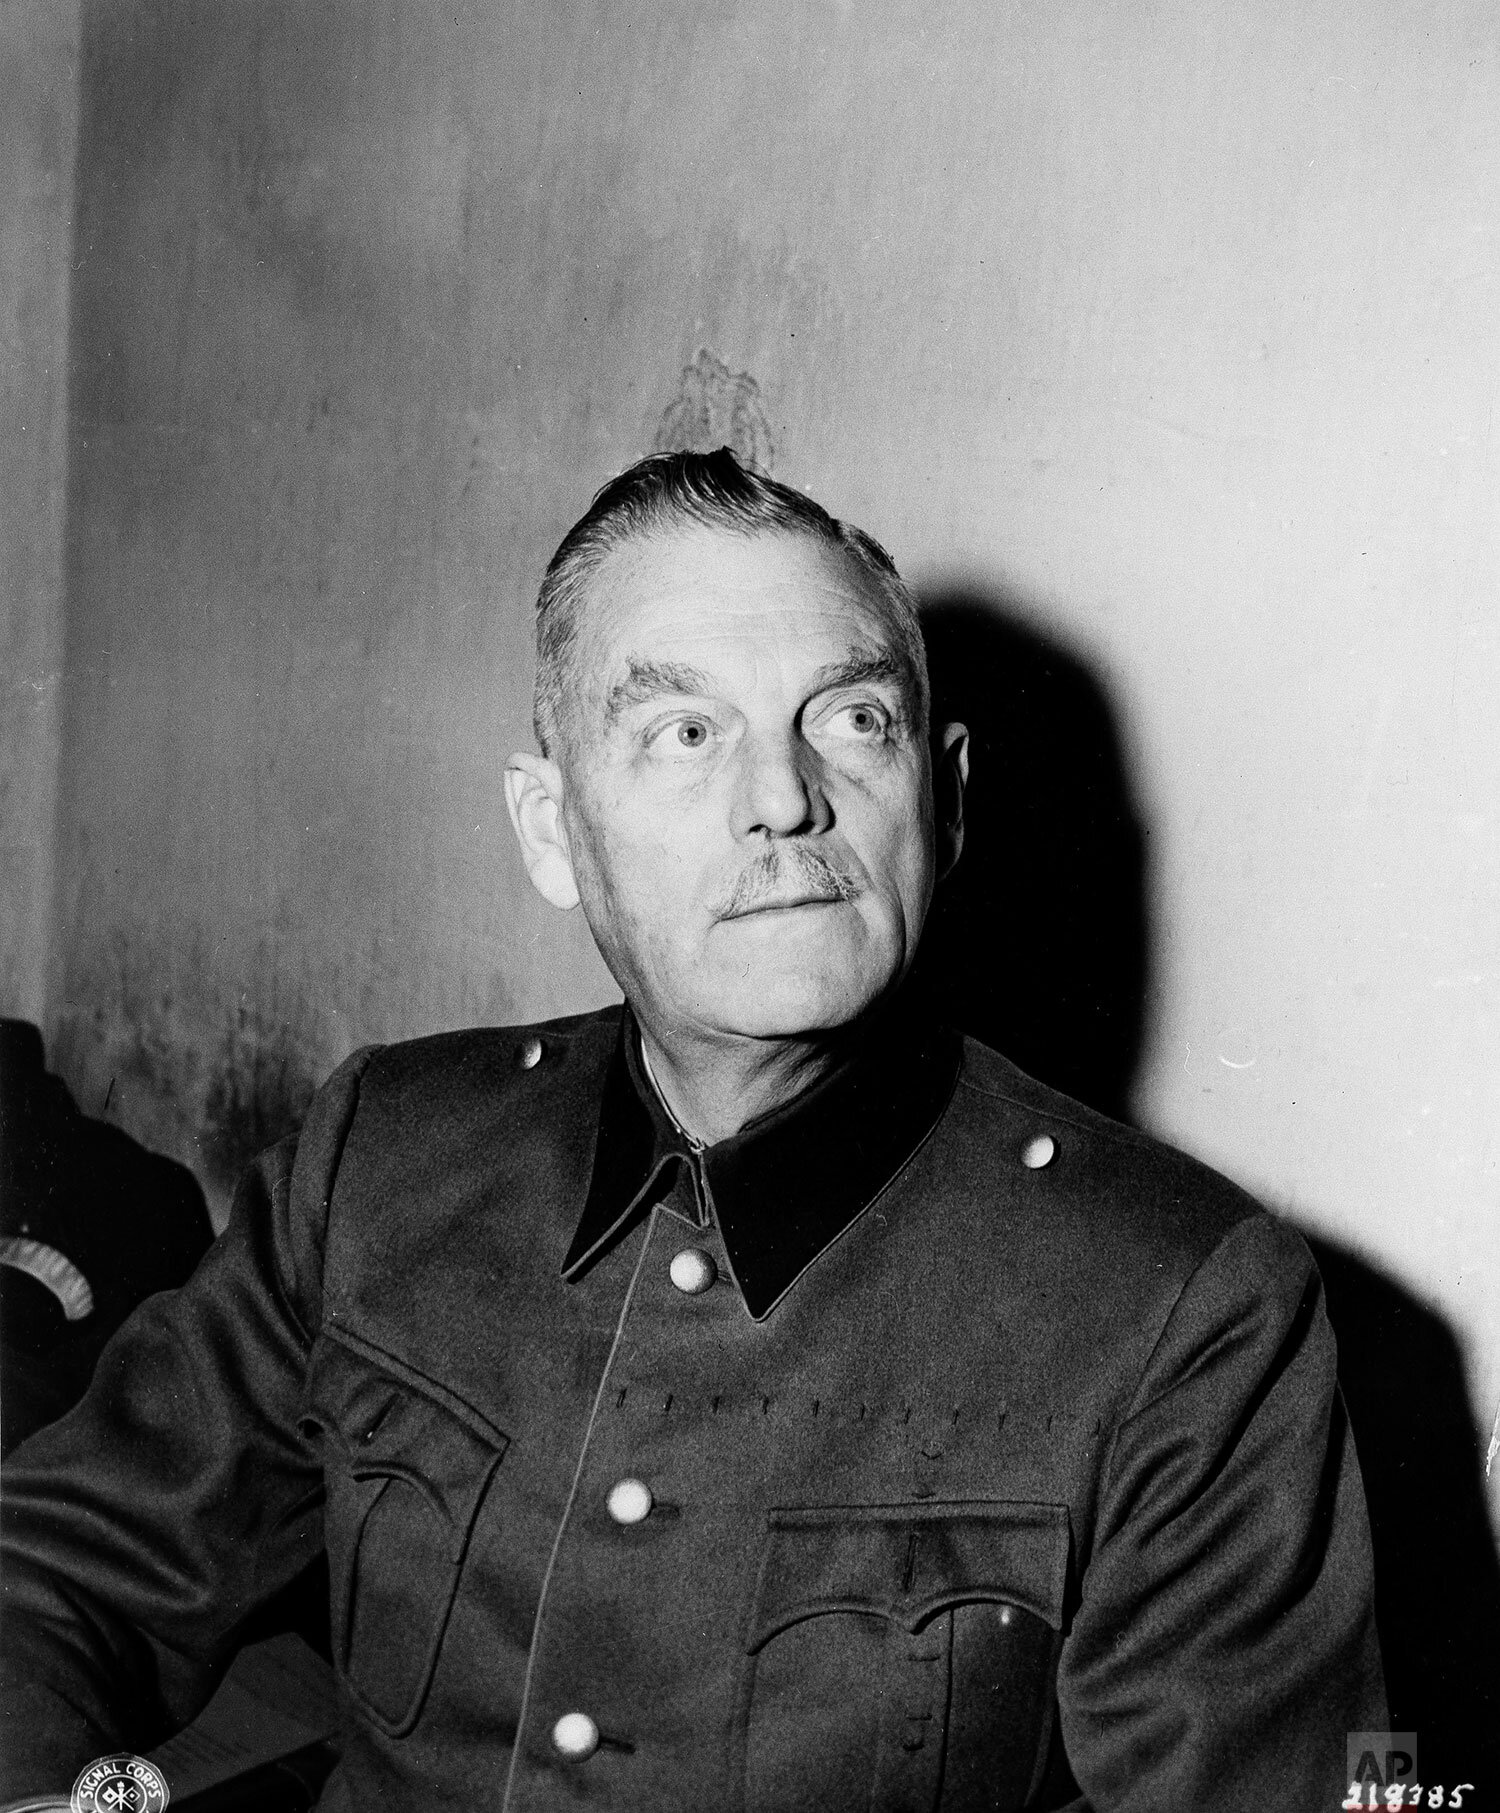  Wilhelm Keitel, defendant at the war crimes trials, in his cell in the city jail, Nuremberg, Germany, Nov. 24, 1945. The former German leaders are being held there by the International Military Tribunal. (AP Photo) 